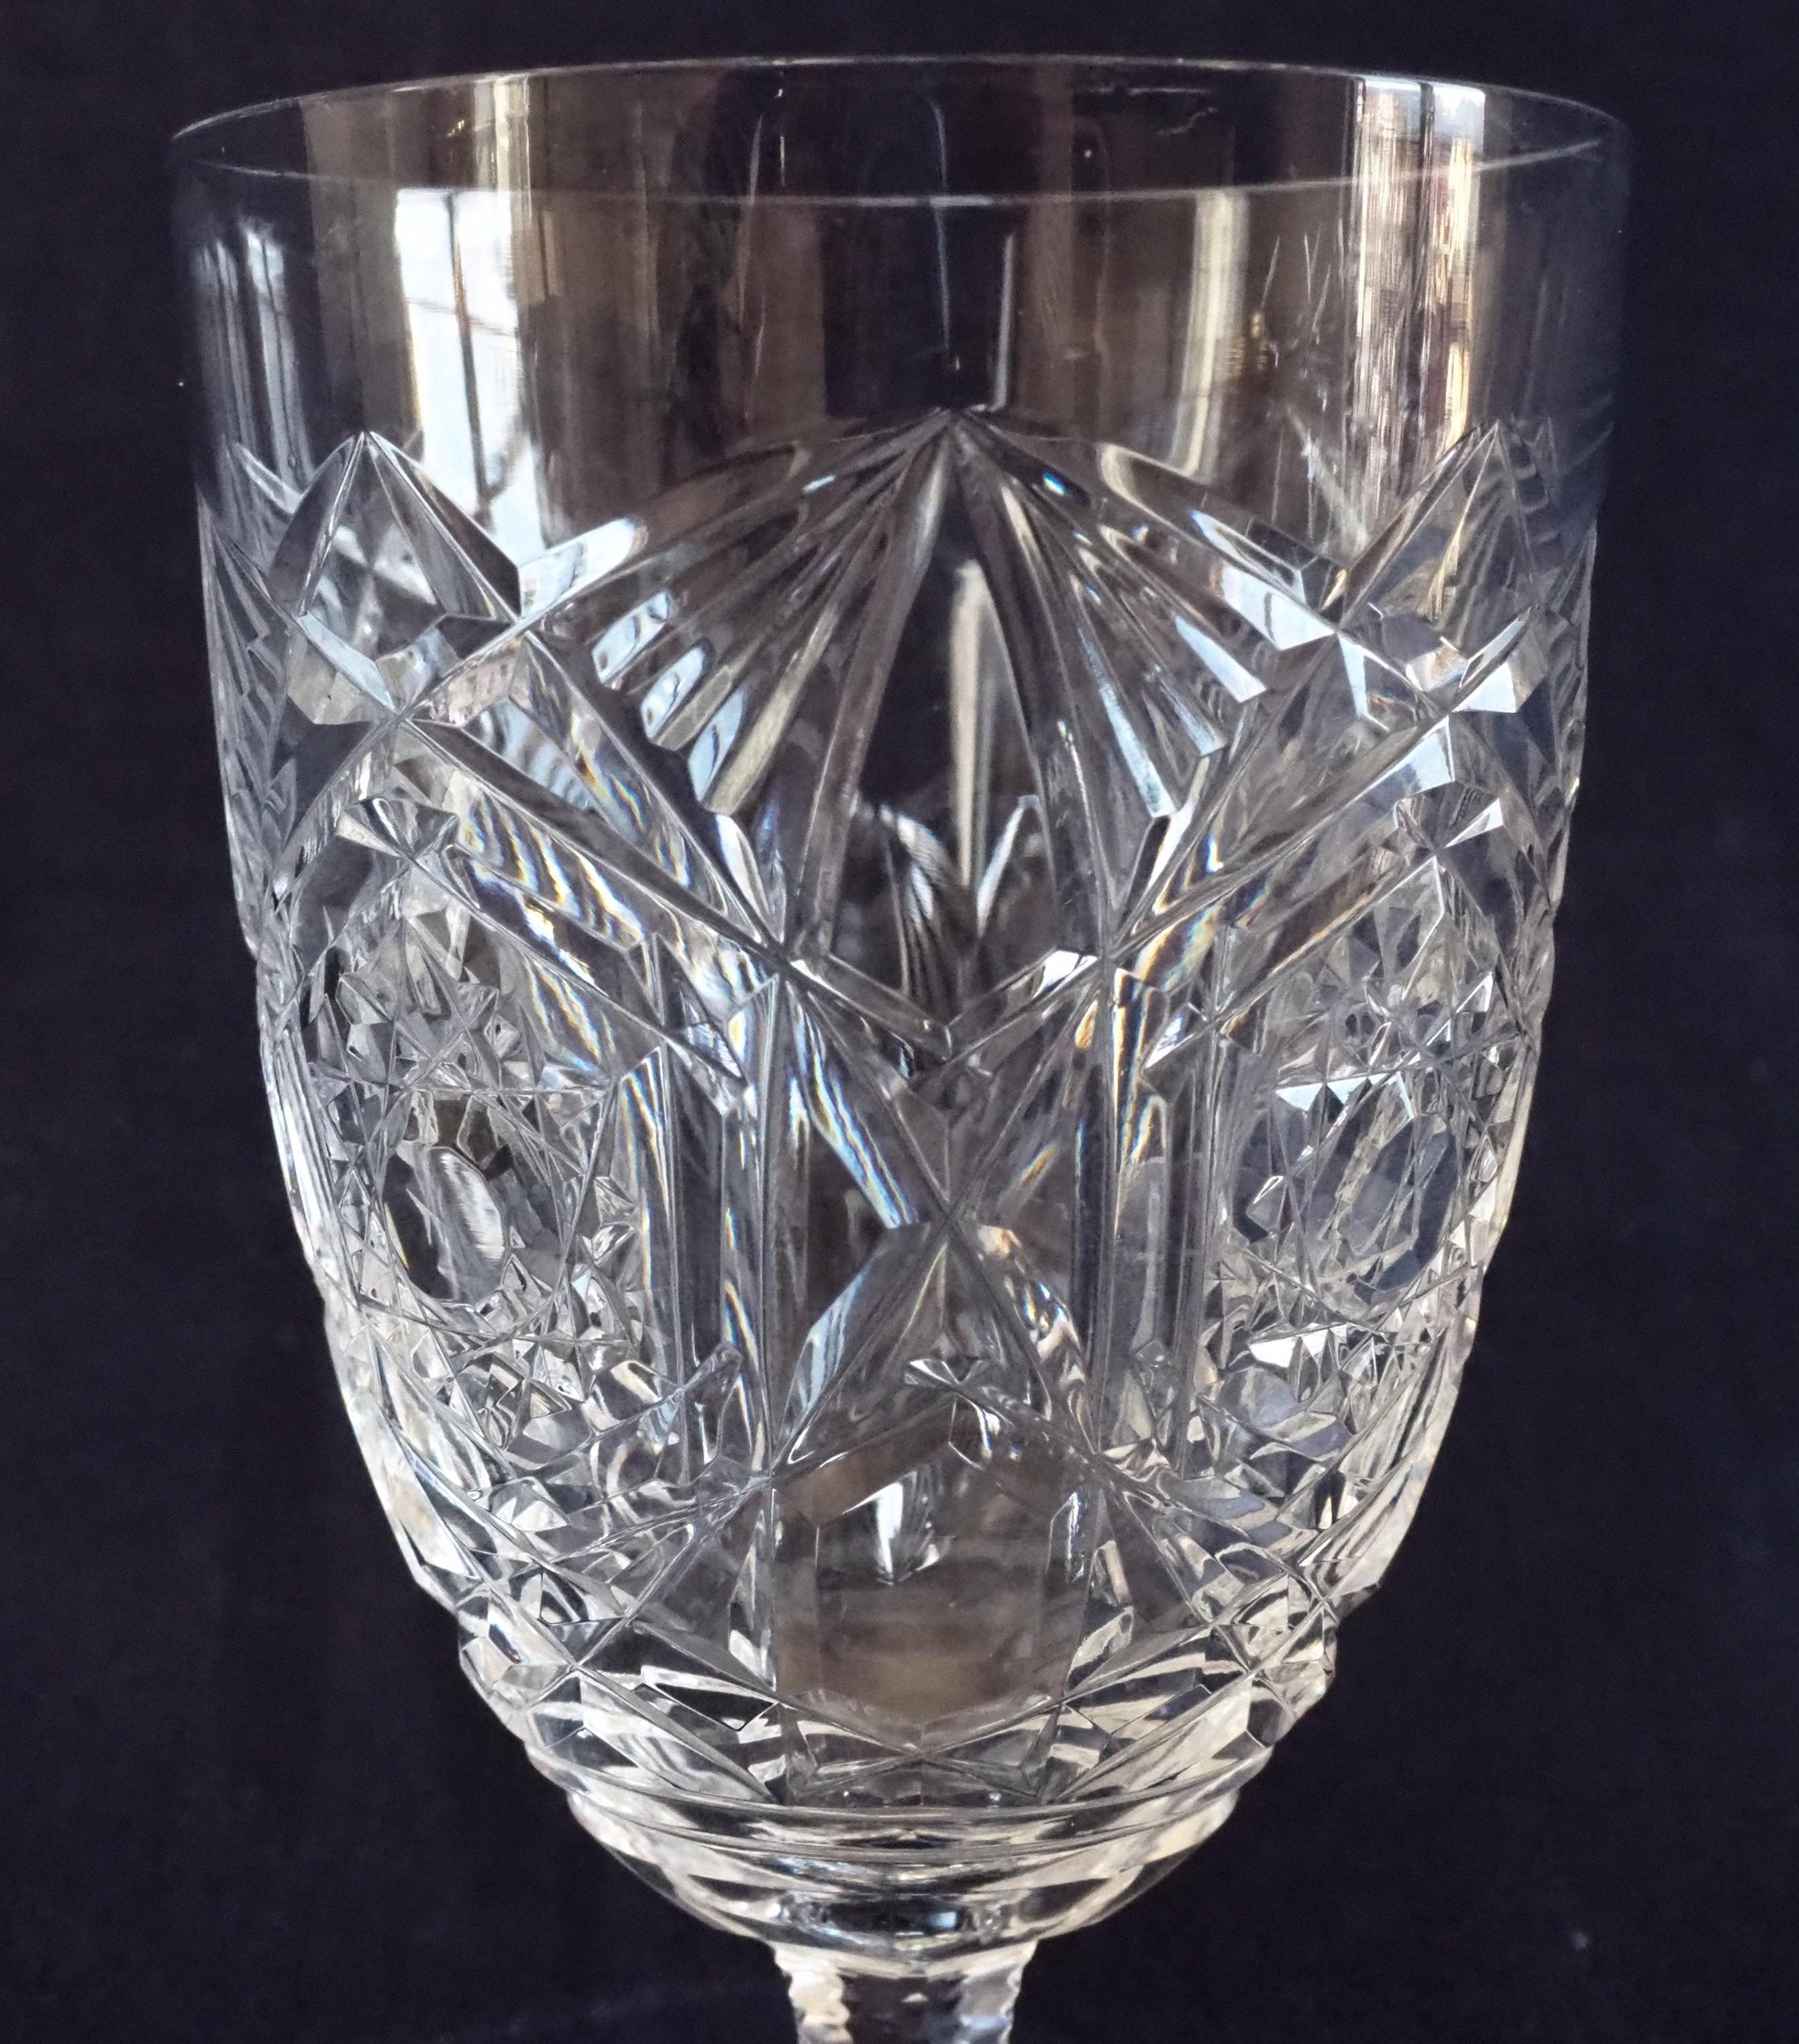 20th Century Baccarat Crystal Vase, Clear Cut Crystal, Lagny Pattern, Signed